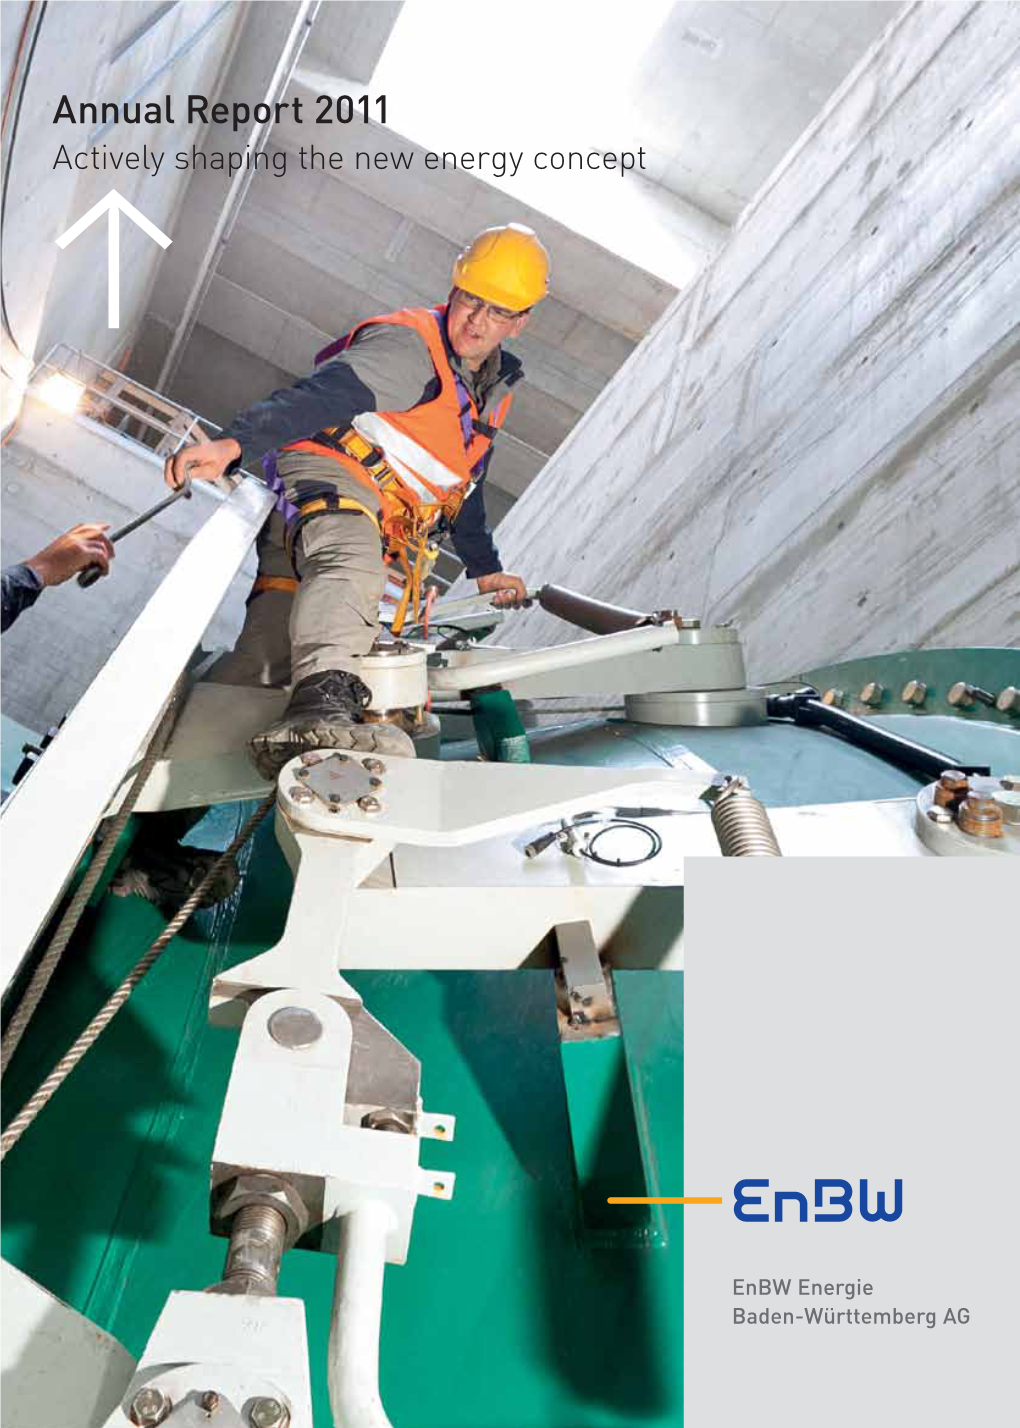 Enbw Annual Report 2011: 7 March 2012